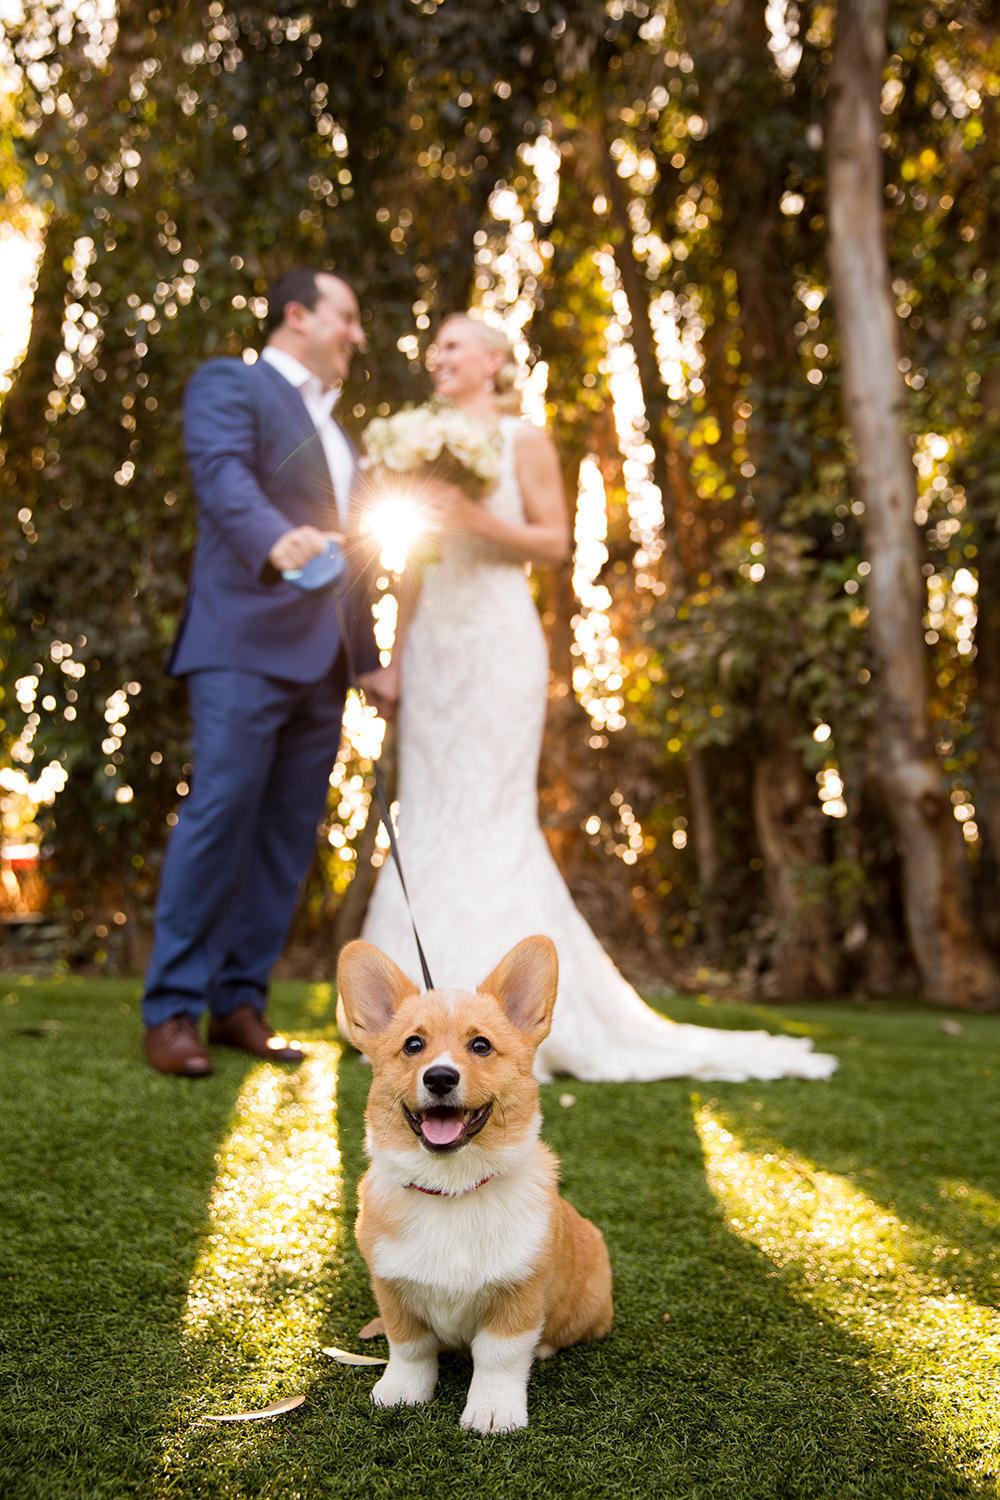 The cutest corgi you will ever see at a wedding